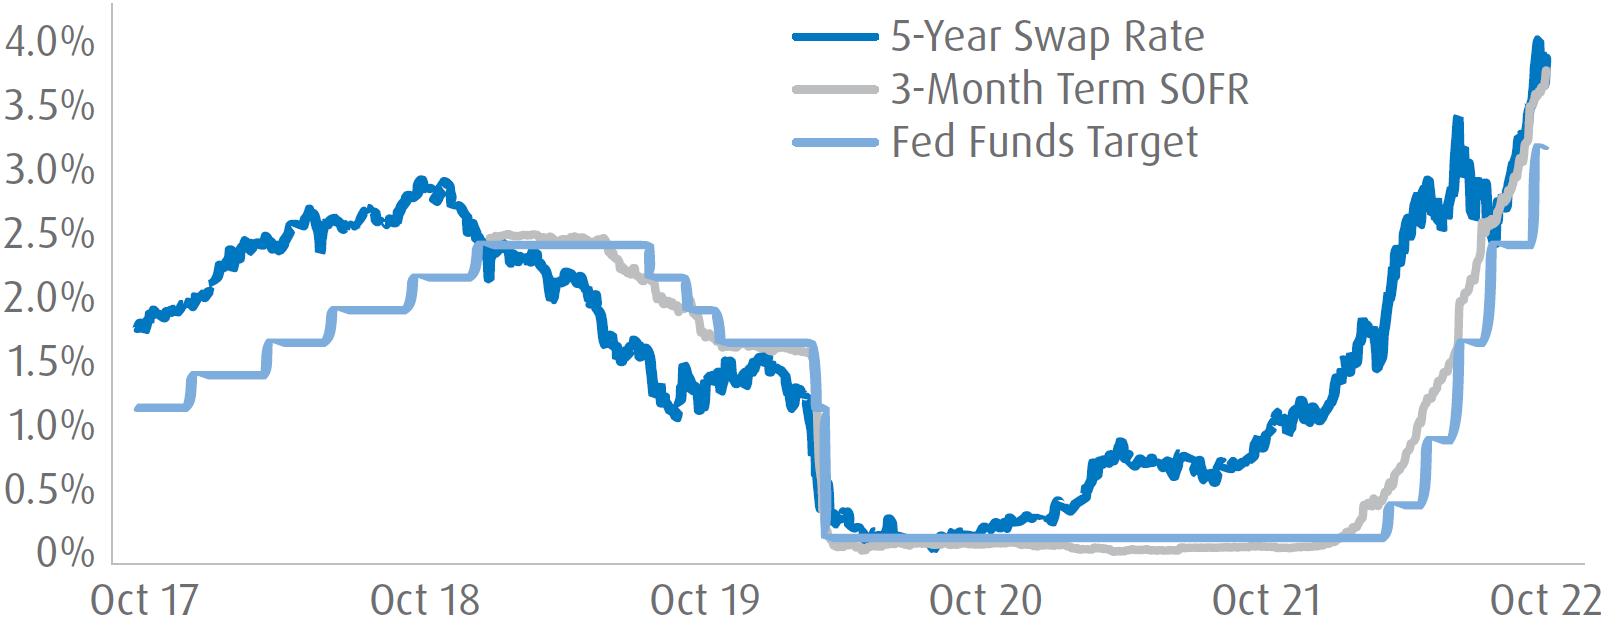 hart with a historical view of interest rates since October of 2017. The chart shows the 5-year Swap Rate, the 3-Month Term SOFR and Fed Funds Targets over this period. It indicates that the three numbers follow the same trend line and the October 2022 numbers are higher than any time in the past 5 years.